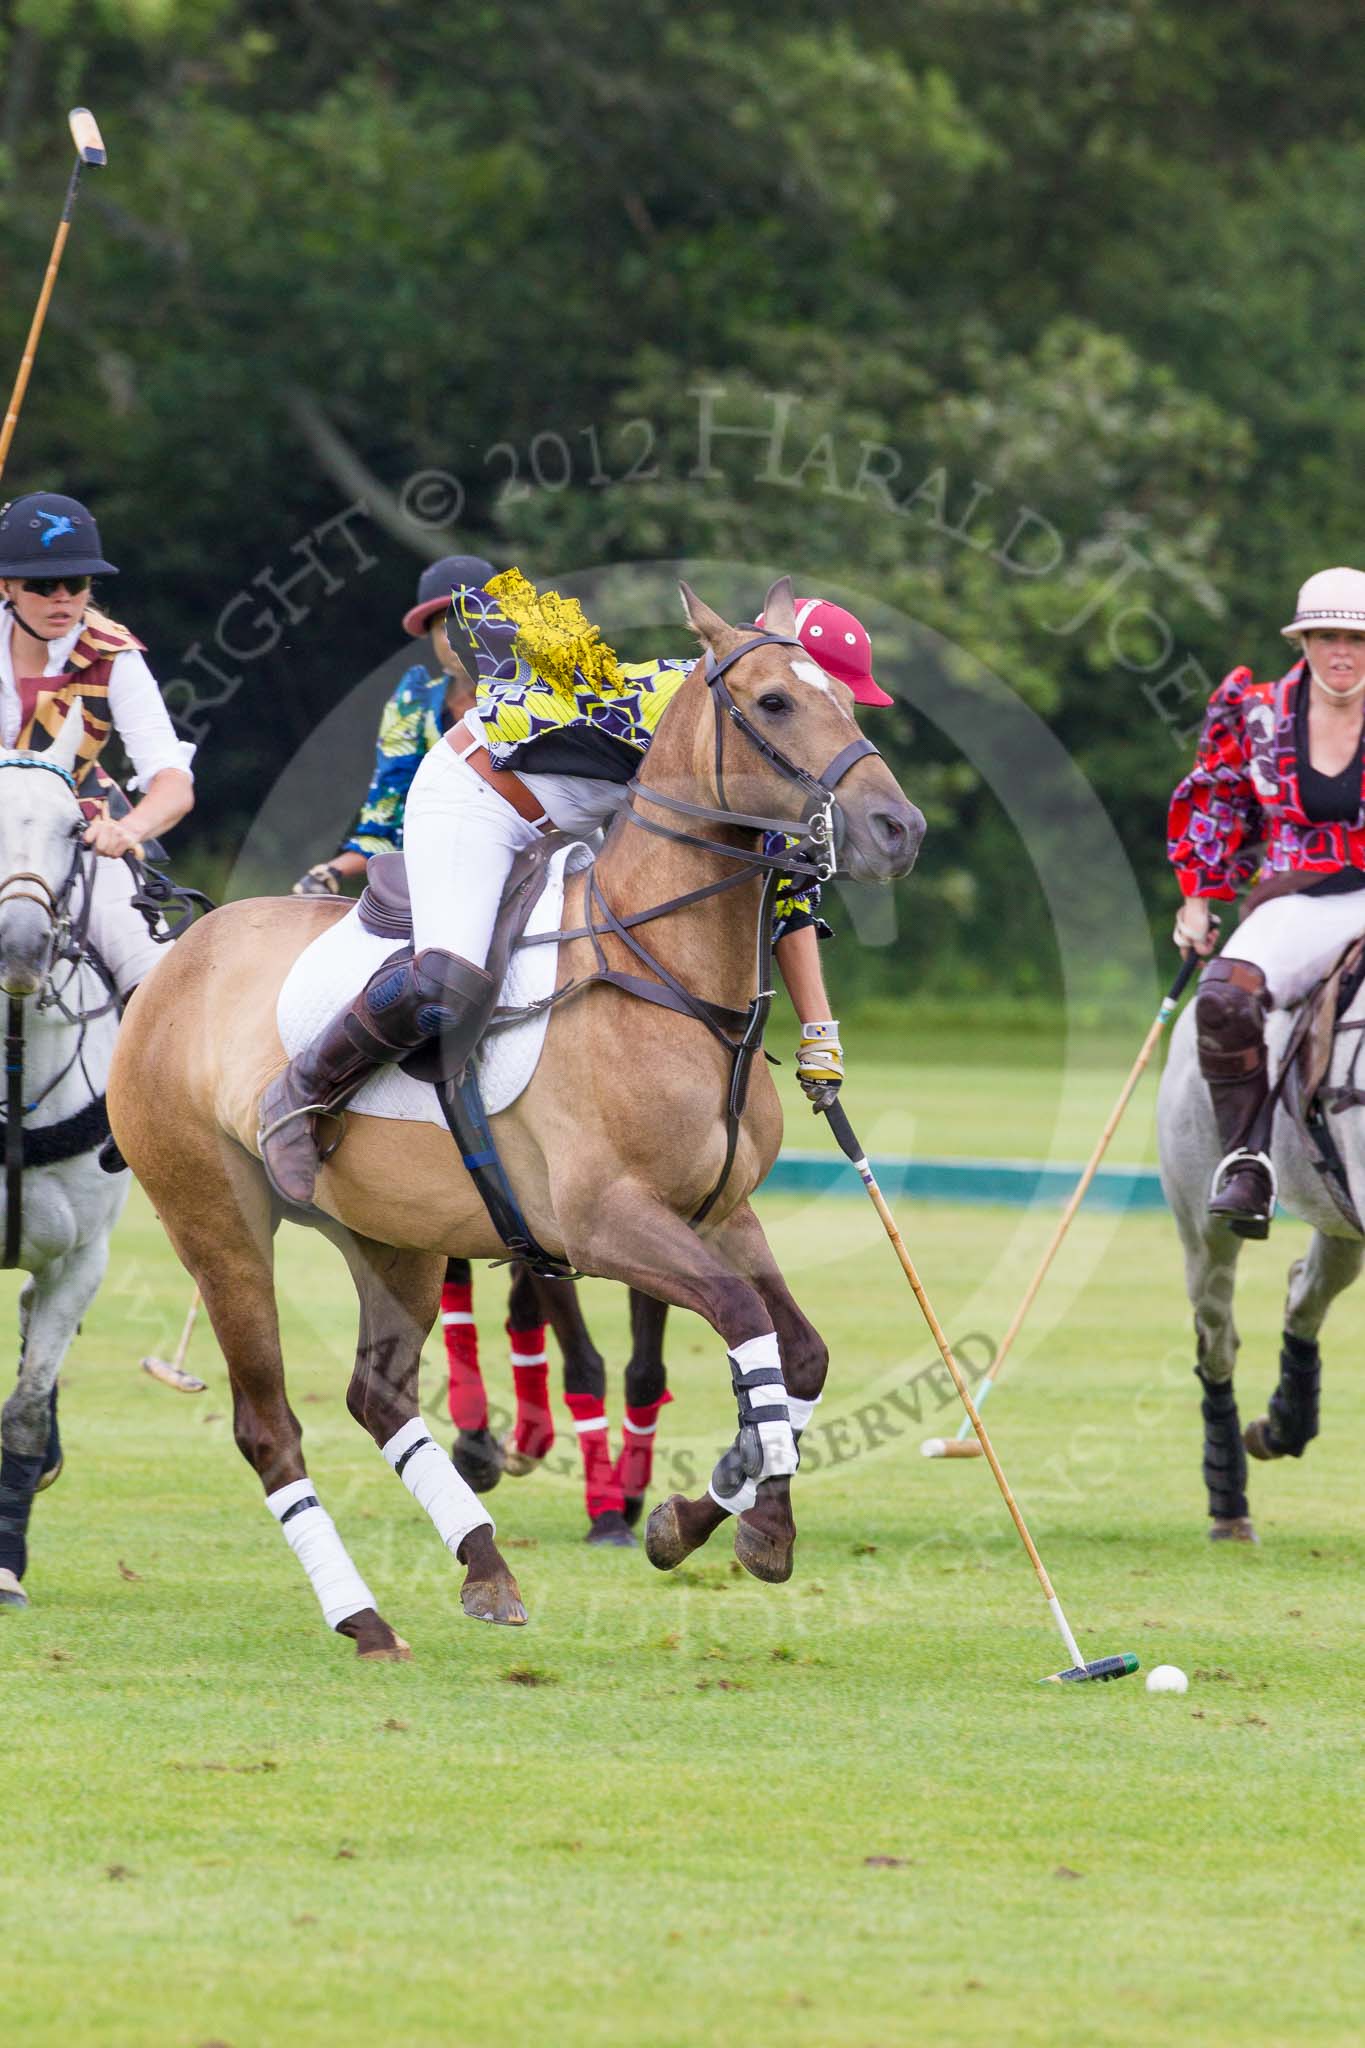 7th Heritage Polo Cup semi-finals: AMG PETROENERGY Sophie Kyriazi playing a nearside..
Hurtwood Park Polo Club,
Ewhurst Green,
Surrey,
United Kingdom,
on 04 August 2012 at 14:25, image #219